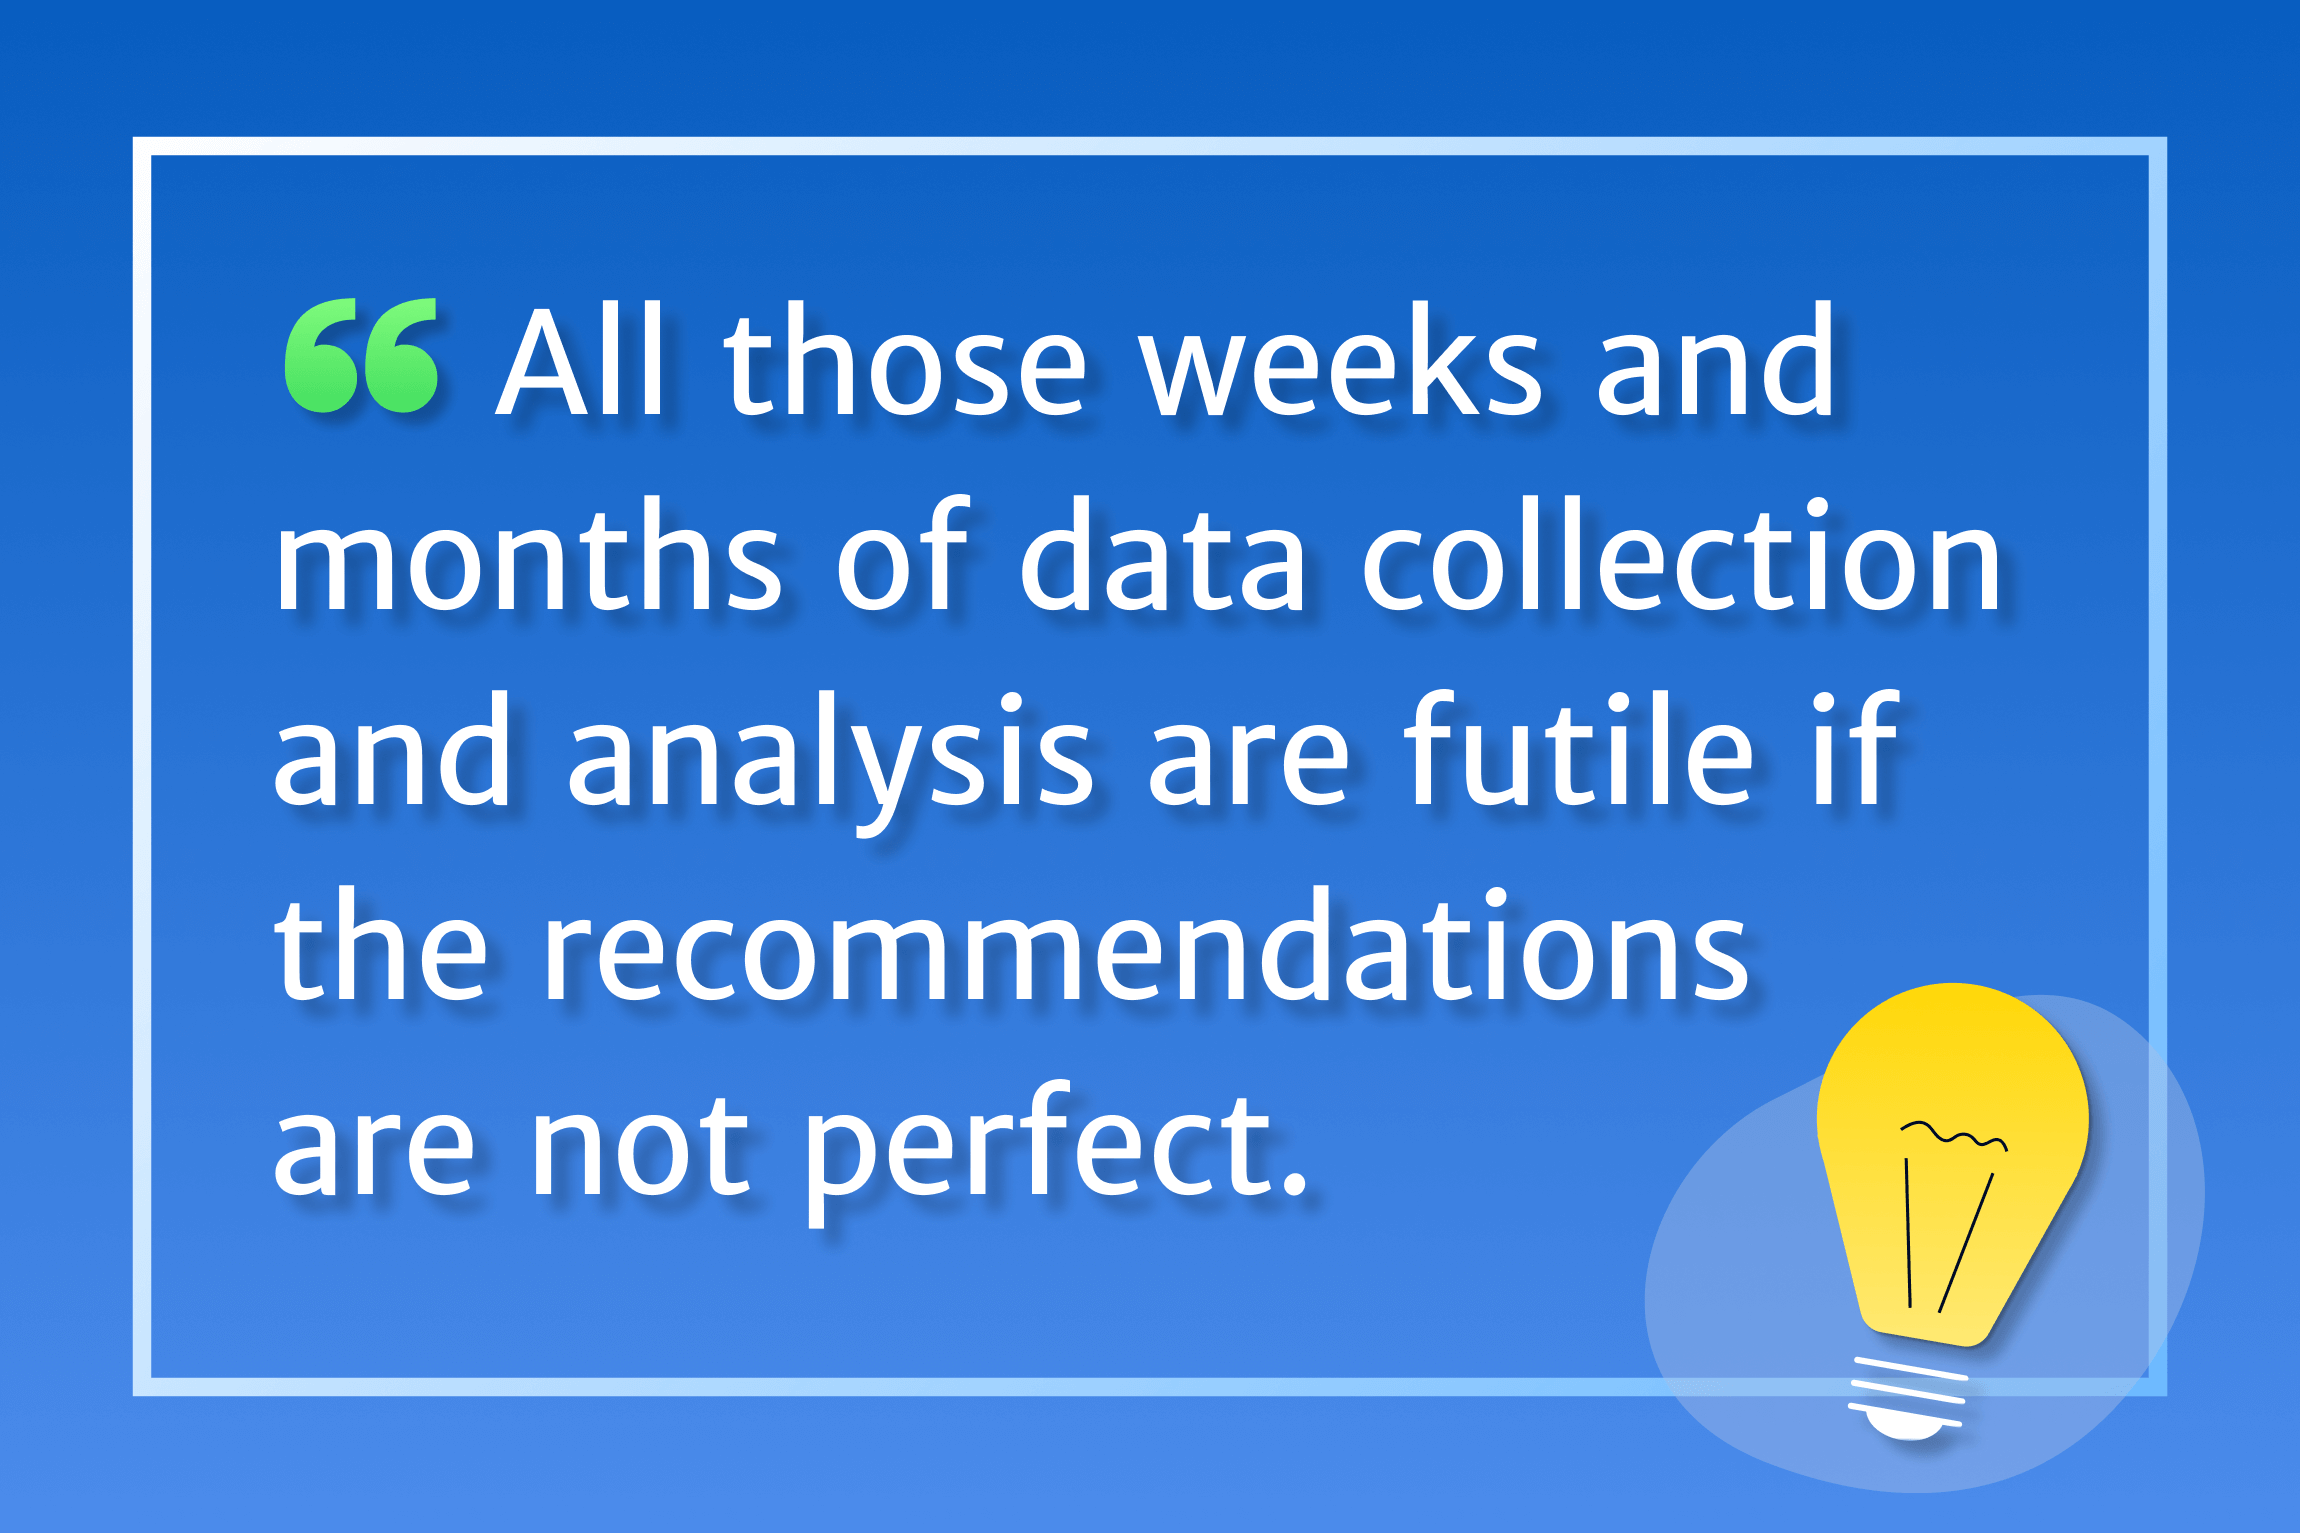 All those weeks and months of data collection and analysis are futile if the recommendations are not perfect